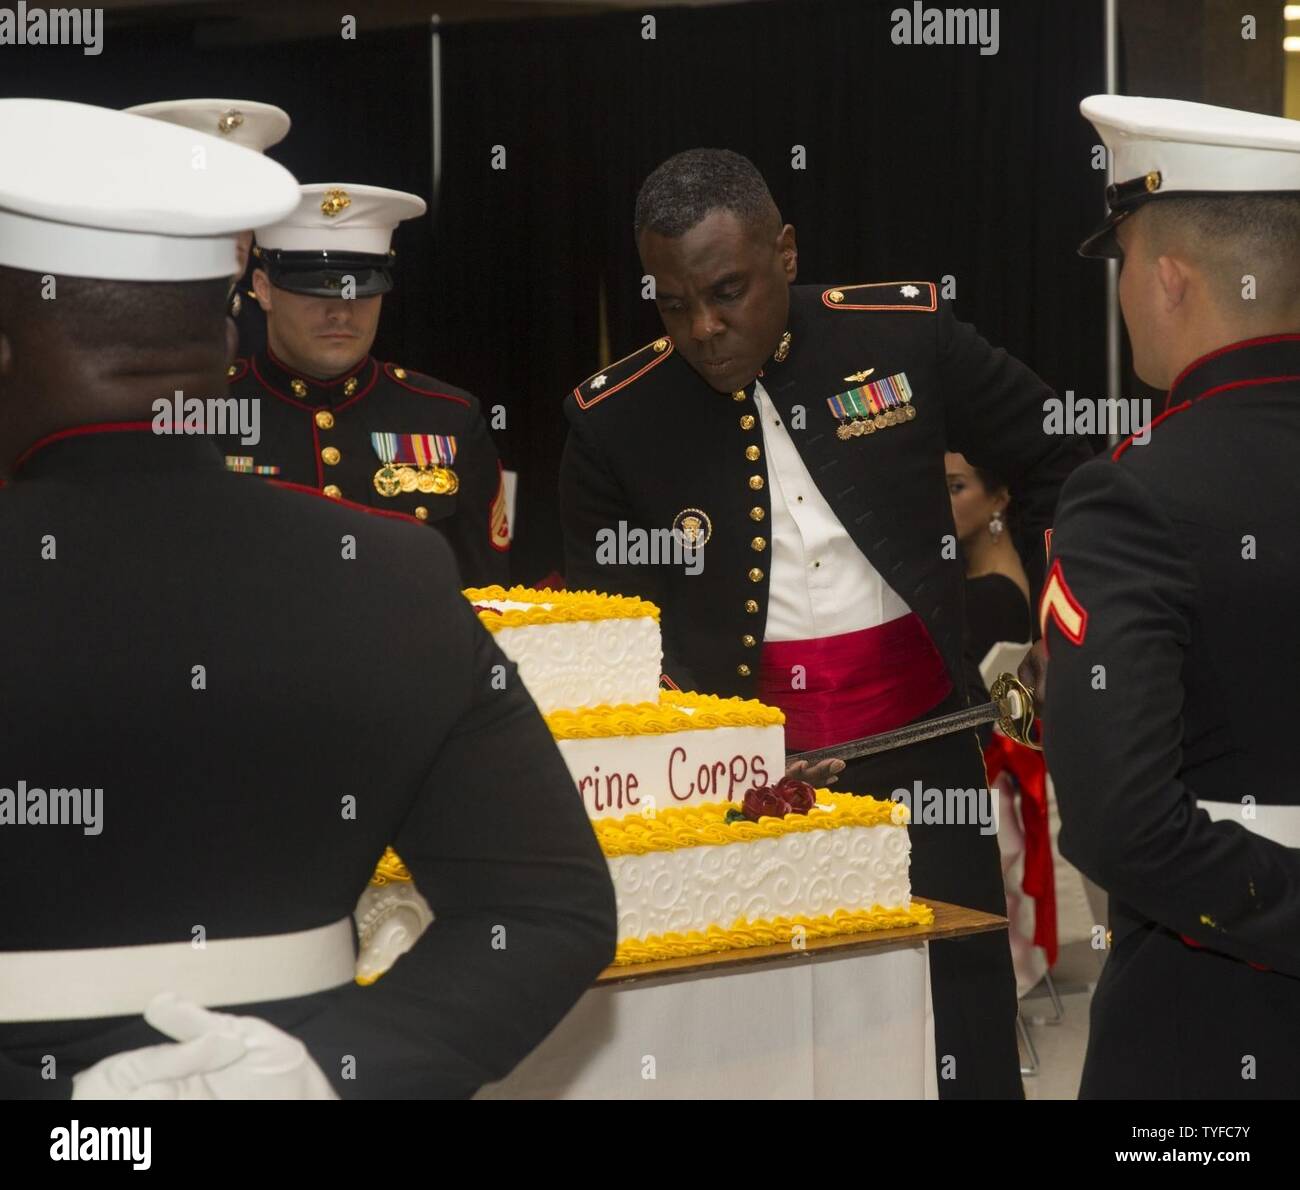 U.S. Marine Corps Lt. Col. Quentin Vaughn, commanding officer, Headquarters and Headquarters Squadron (H&HS), cuts the Marine Corps birthday cake during the H&HS Marine Corps Air Station New River 241st Marine Corps Birthday Ball at the Crystal Coast Civic Center, Morehead City, N.C., Nov. 5, 2016. The Marine Corps has carried 241 years of traditions, values and standards since its establishment in 1775. Stock Photo